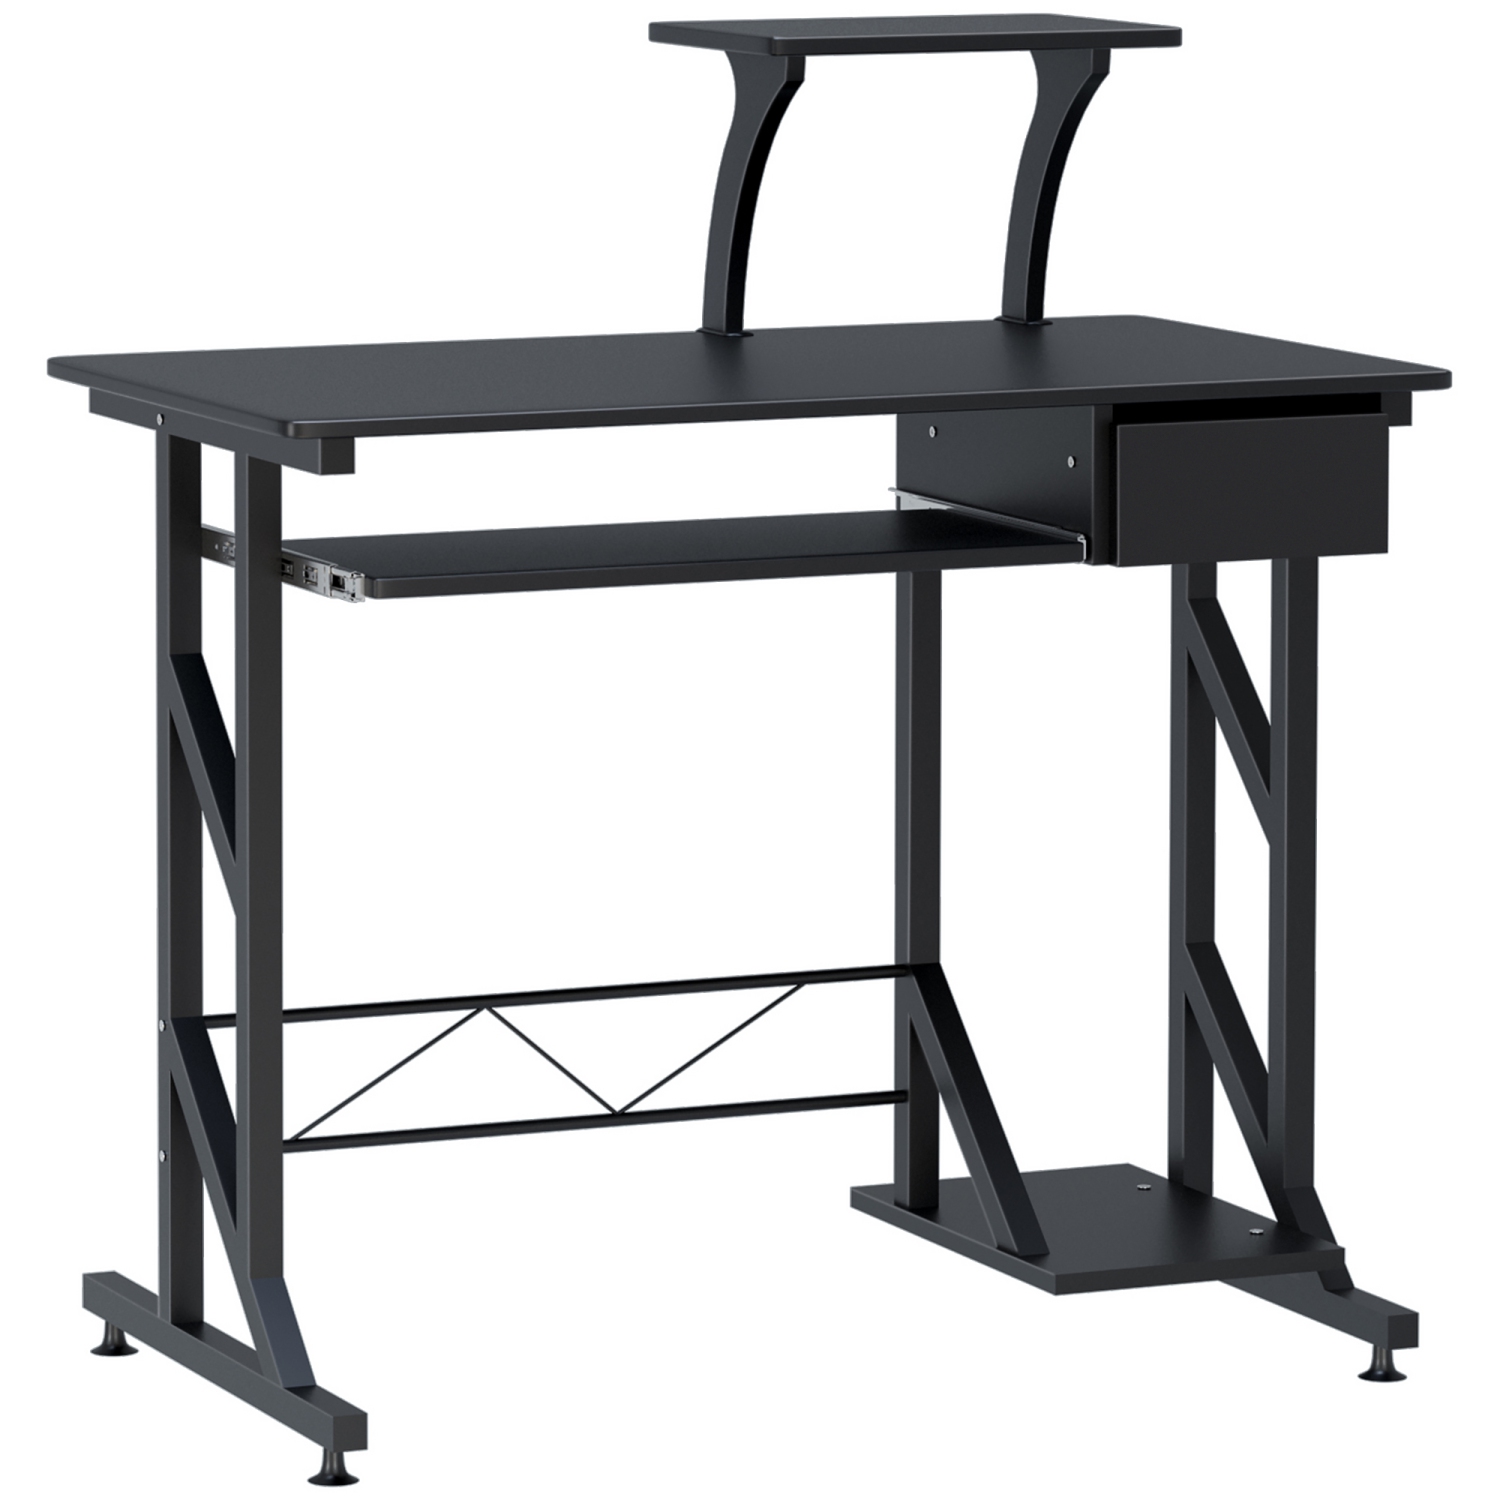 HOMCOM Computer Desk with Keyboard Tray, Writing Desk with Drawer, Workstation for Home Office, Black (35.4"Lx19.7"Wx37.4"H)